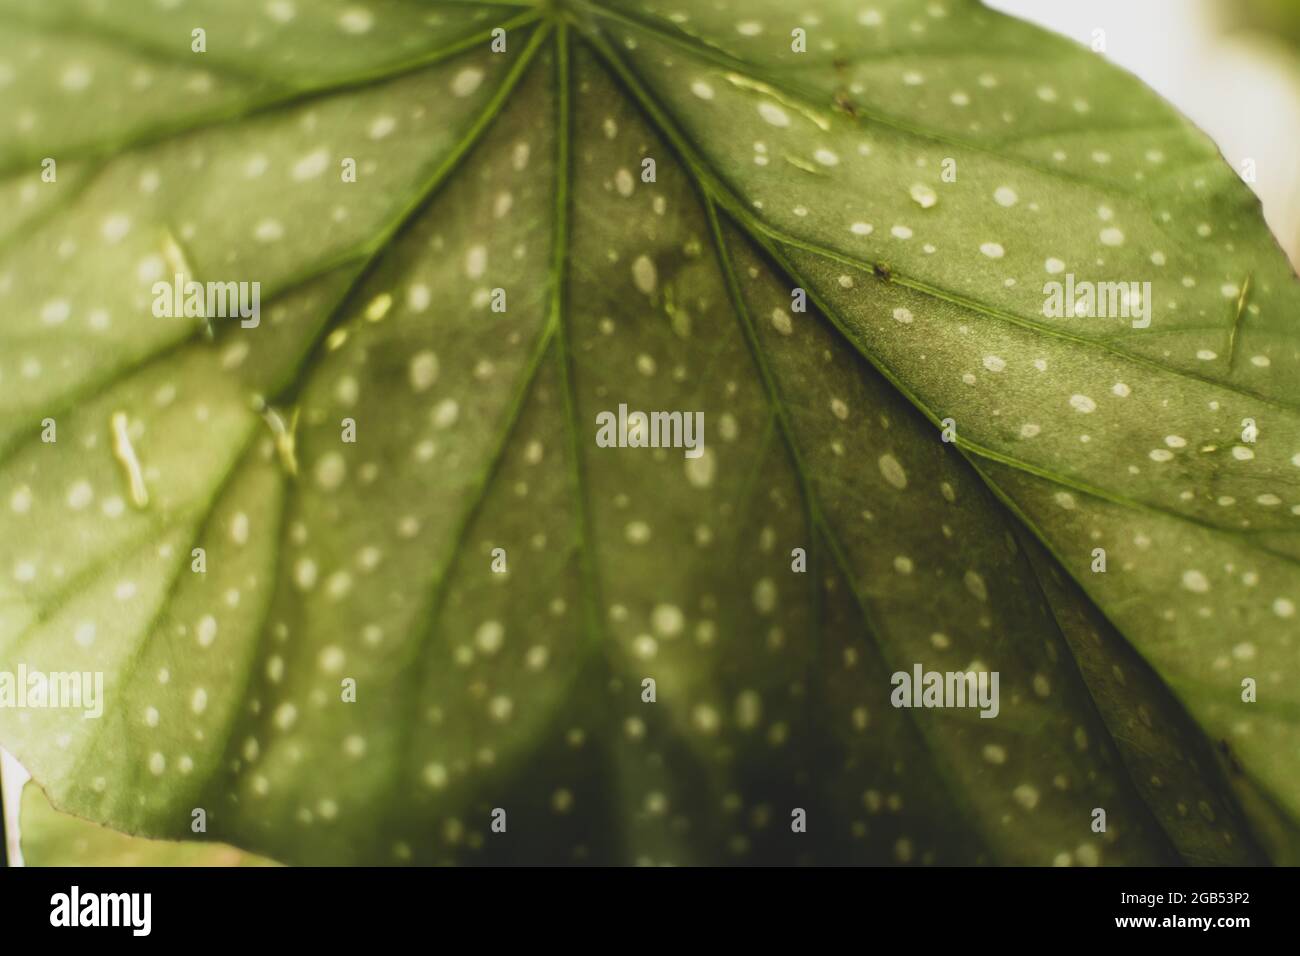 A large green begonia leaf with white spots Stock Photo